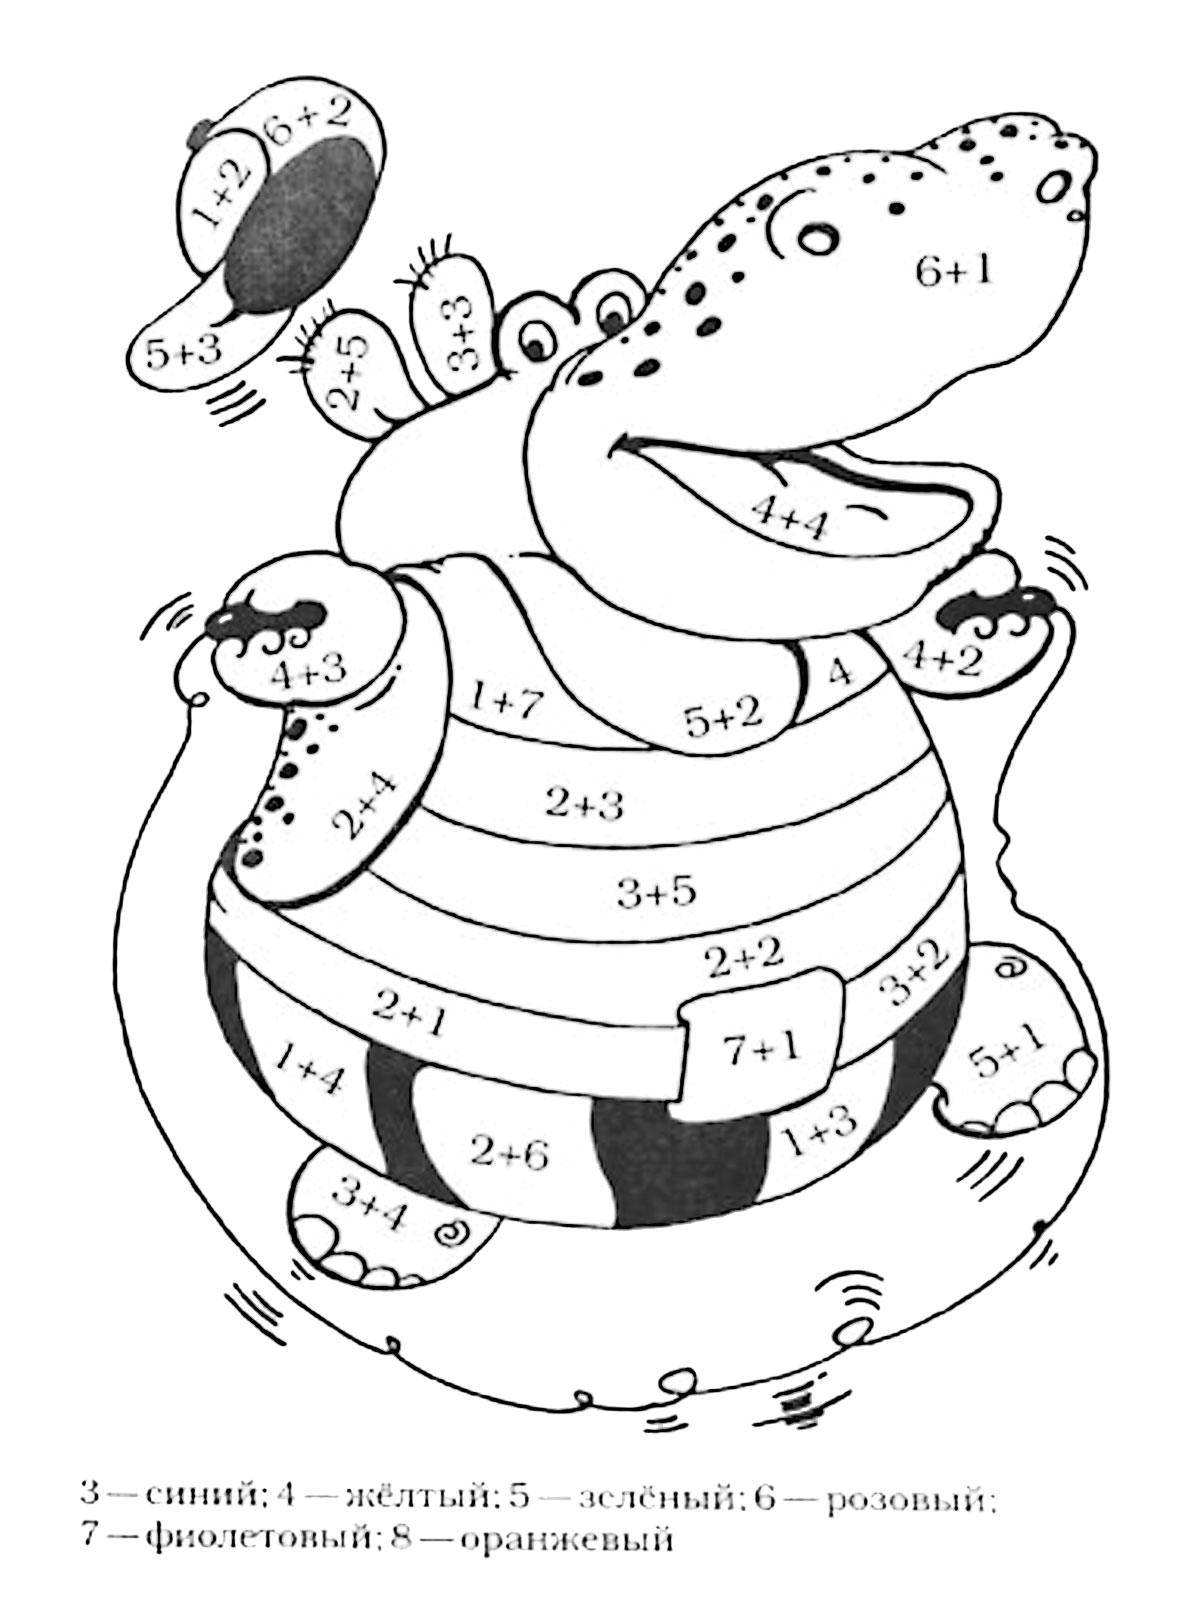 Coloring Paint the Hippo deciding examples. Category mathematical coloring pages. Tags:  Hippo, examples, mathematics.